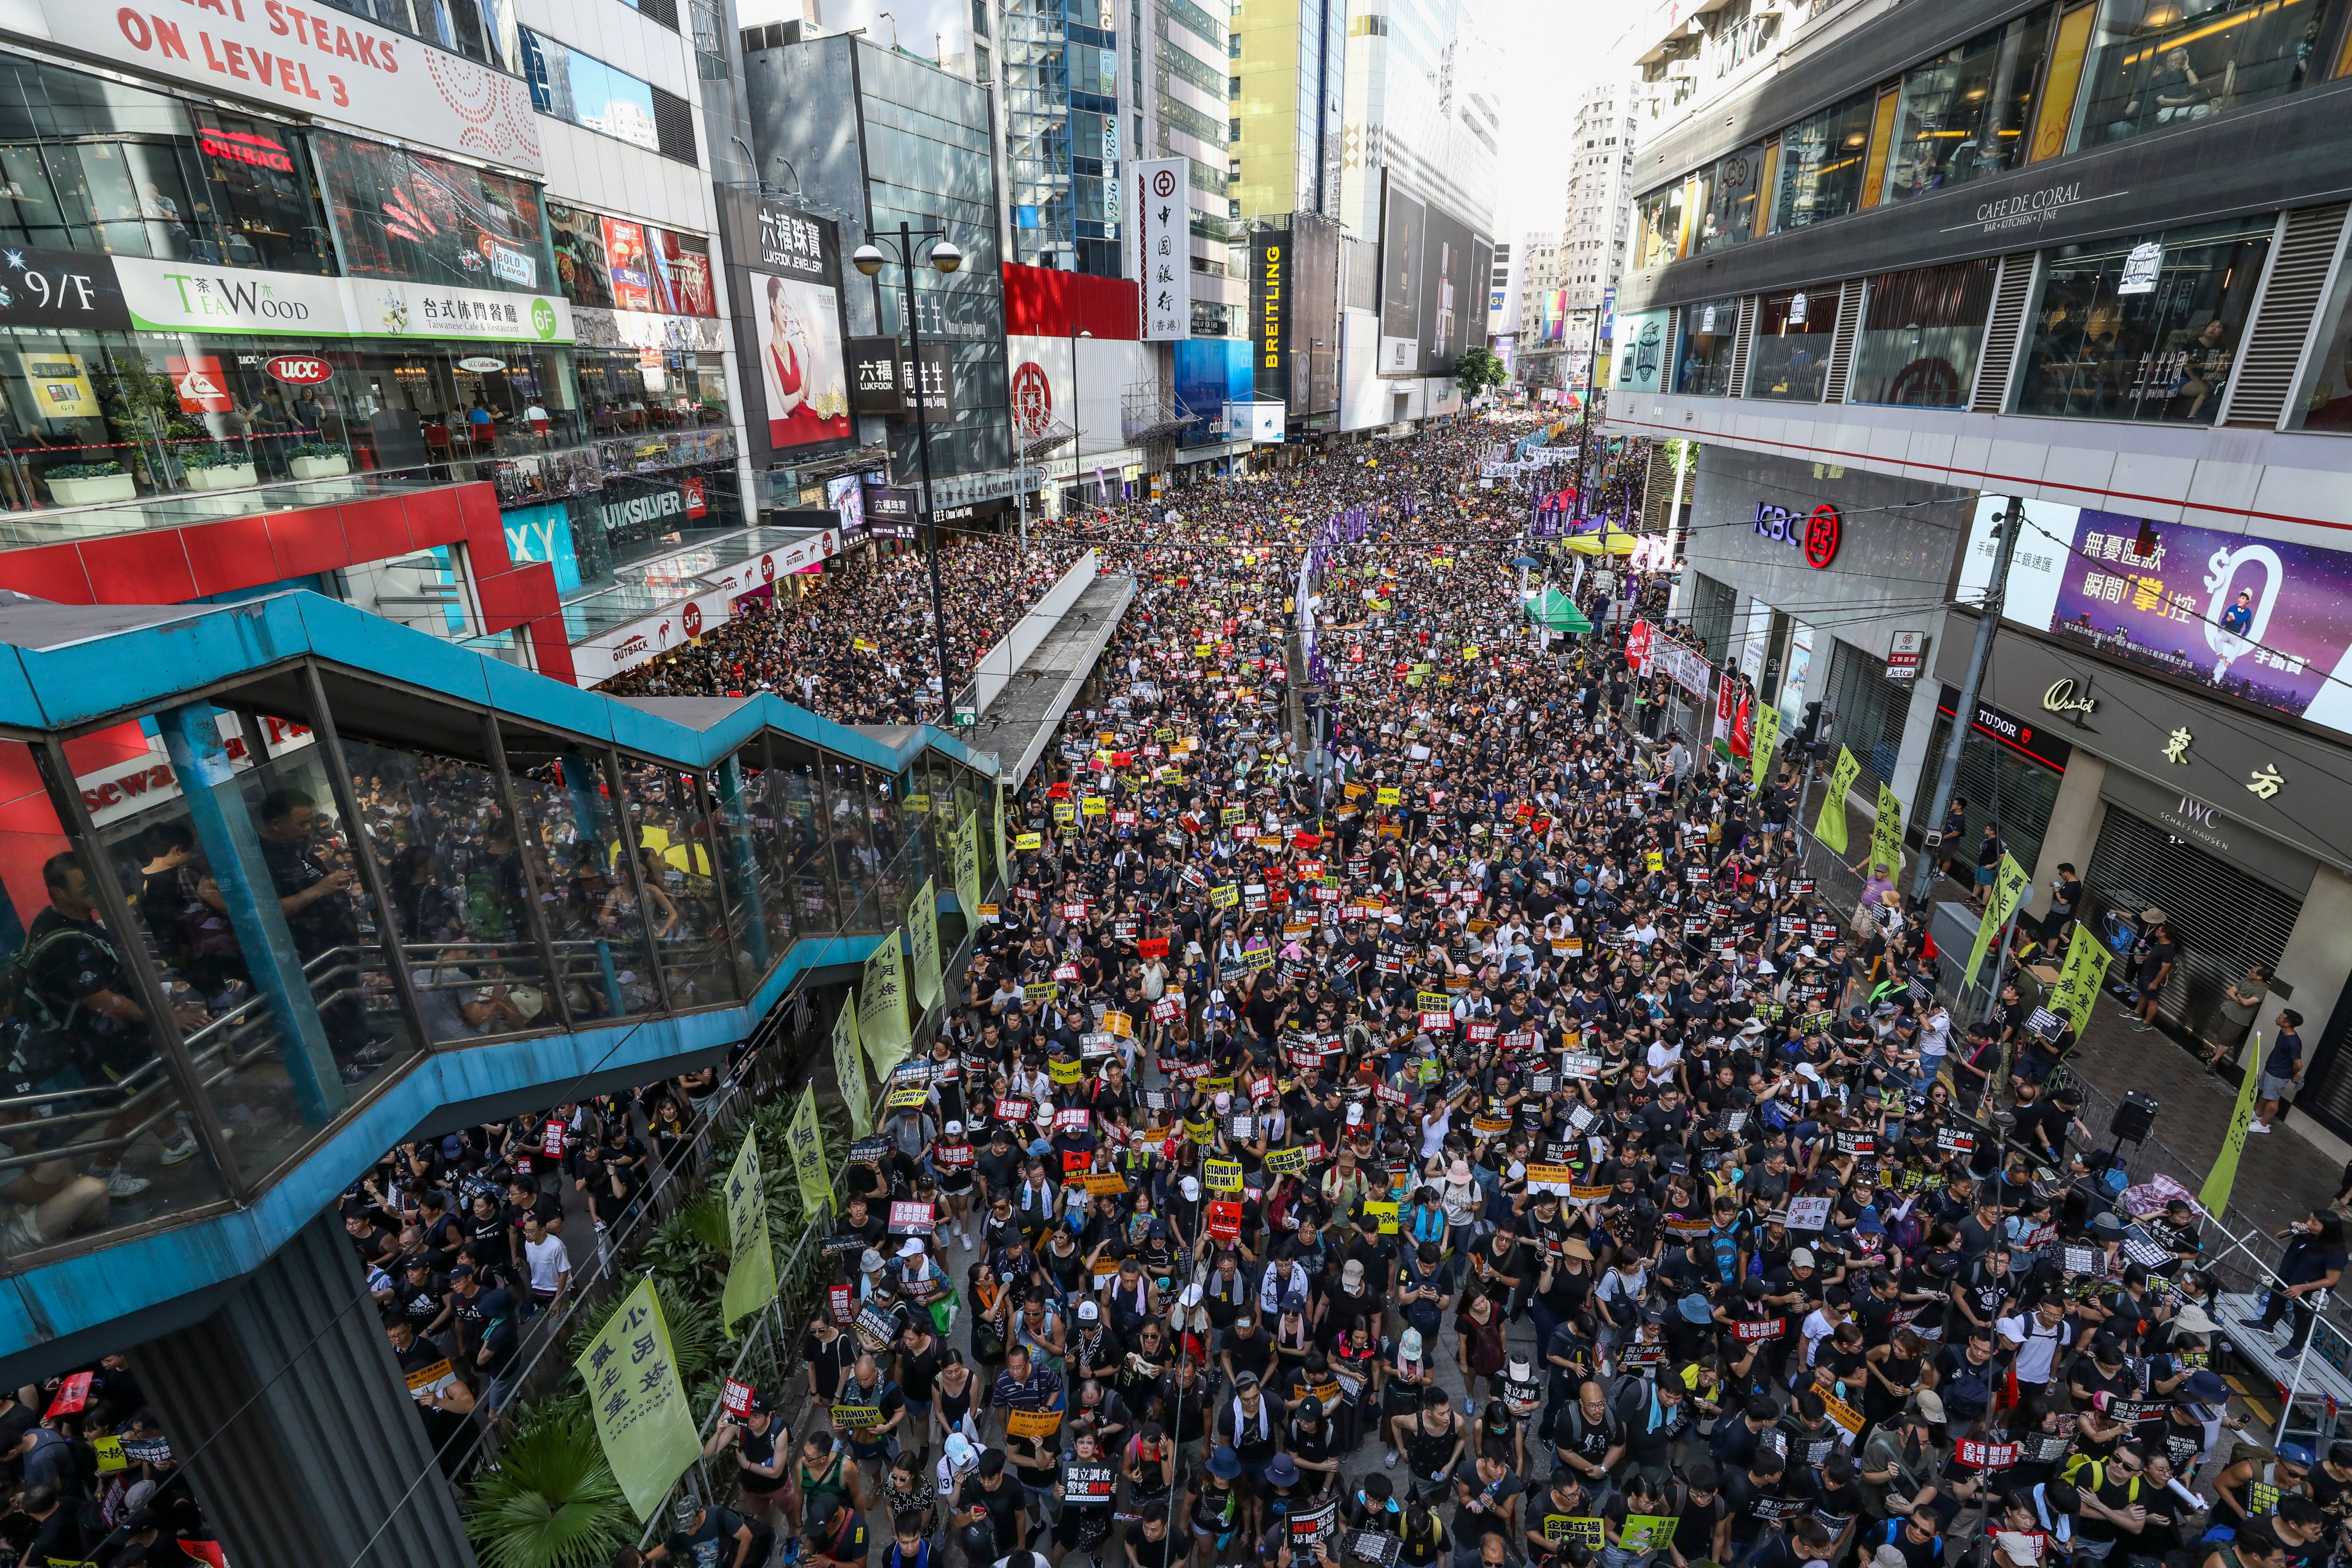 Protesters gather in 2019. A court on Wednesday ruled “Glory to Hong Kong” could be used to arouse anti-government and separatist sentiments. Photo: Dickson Lee